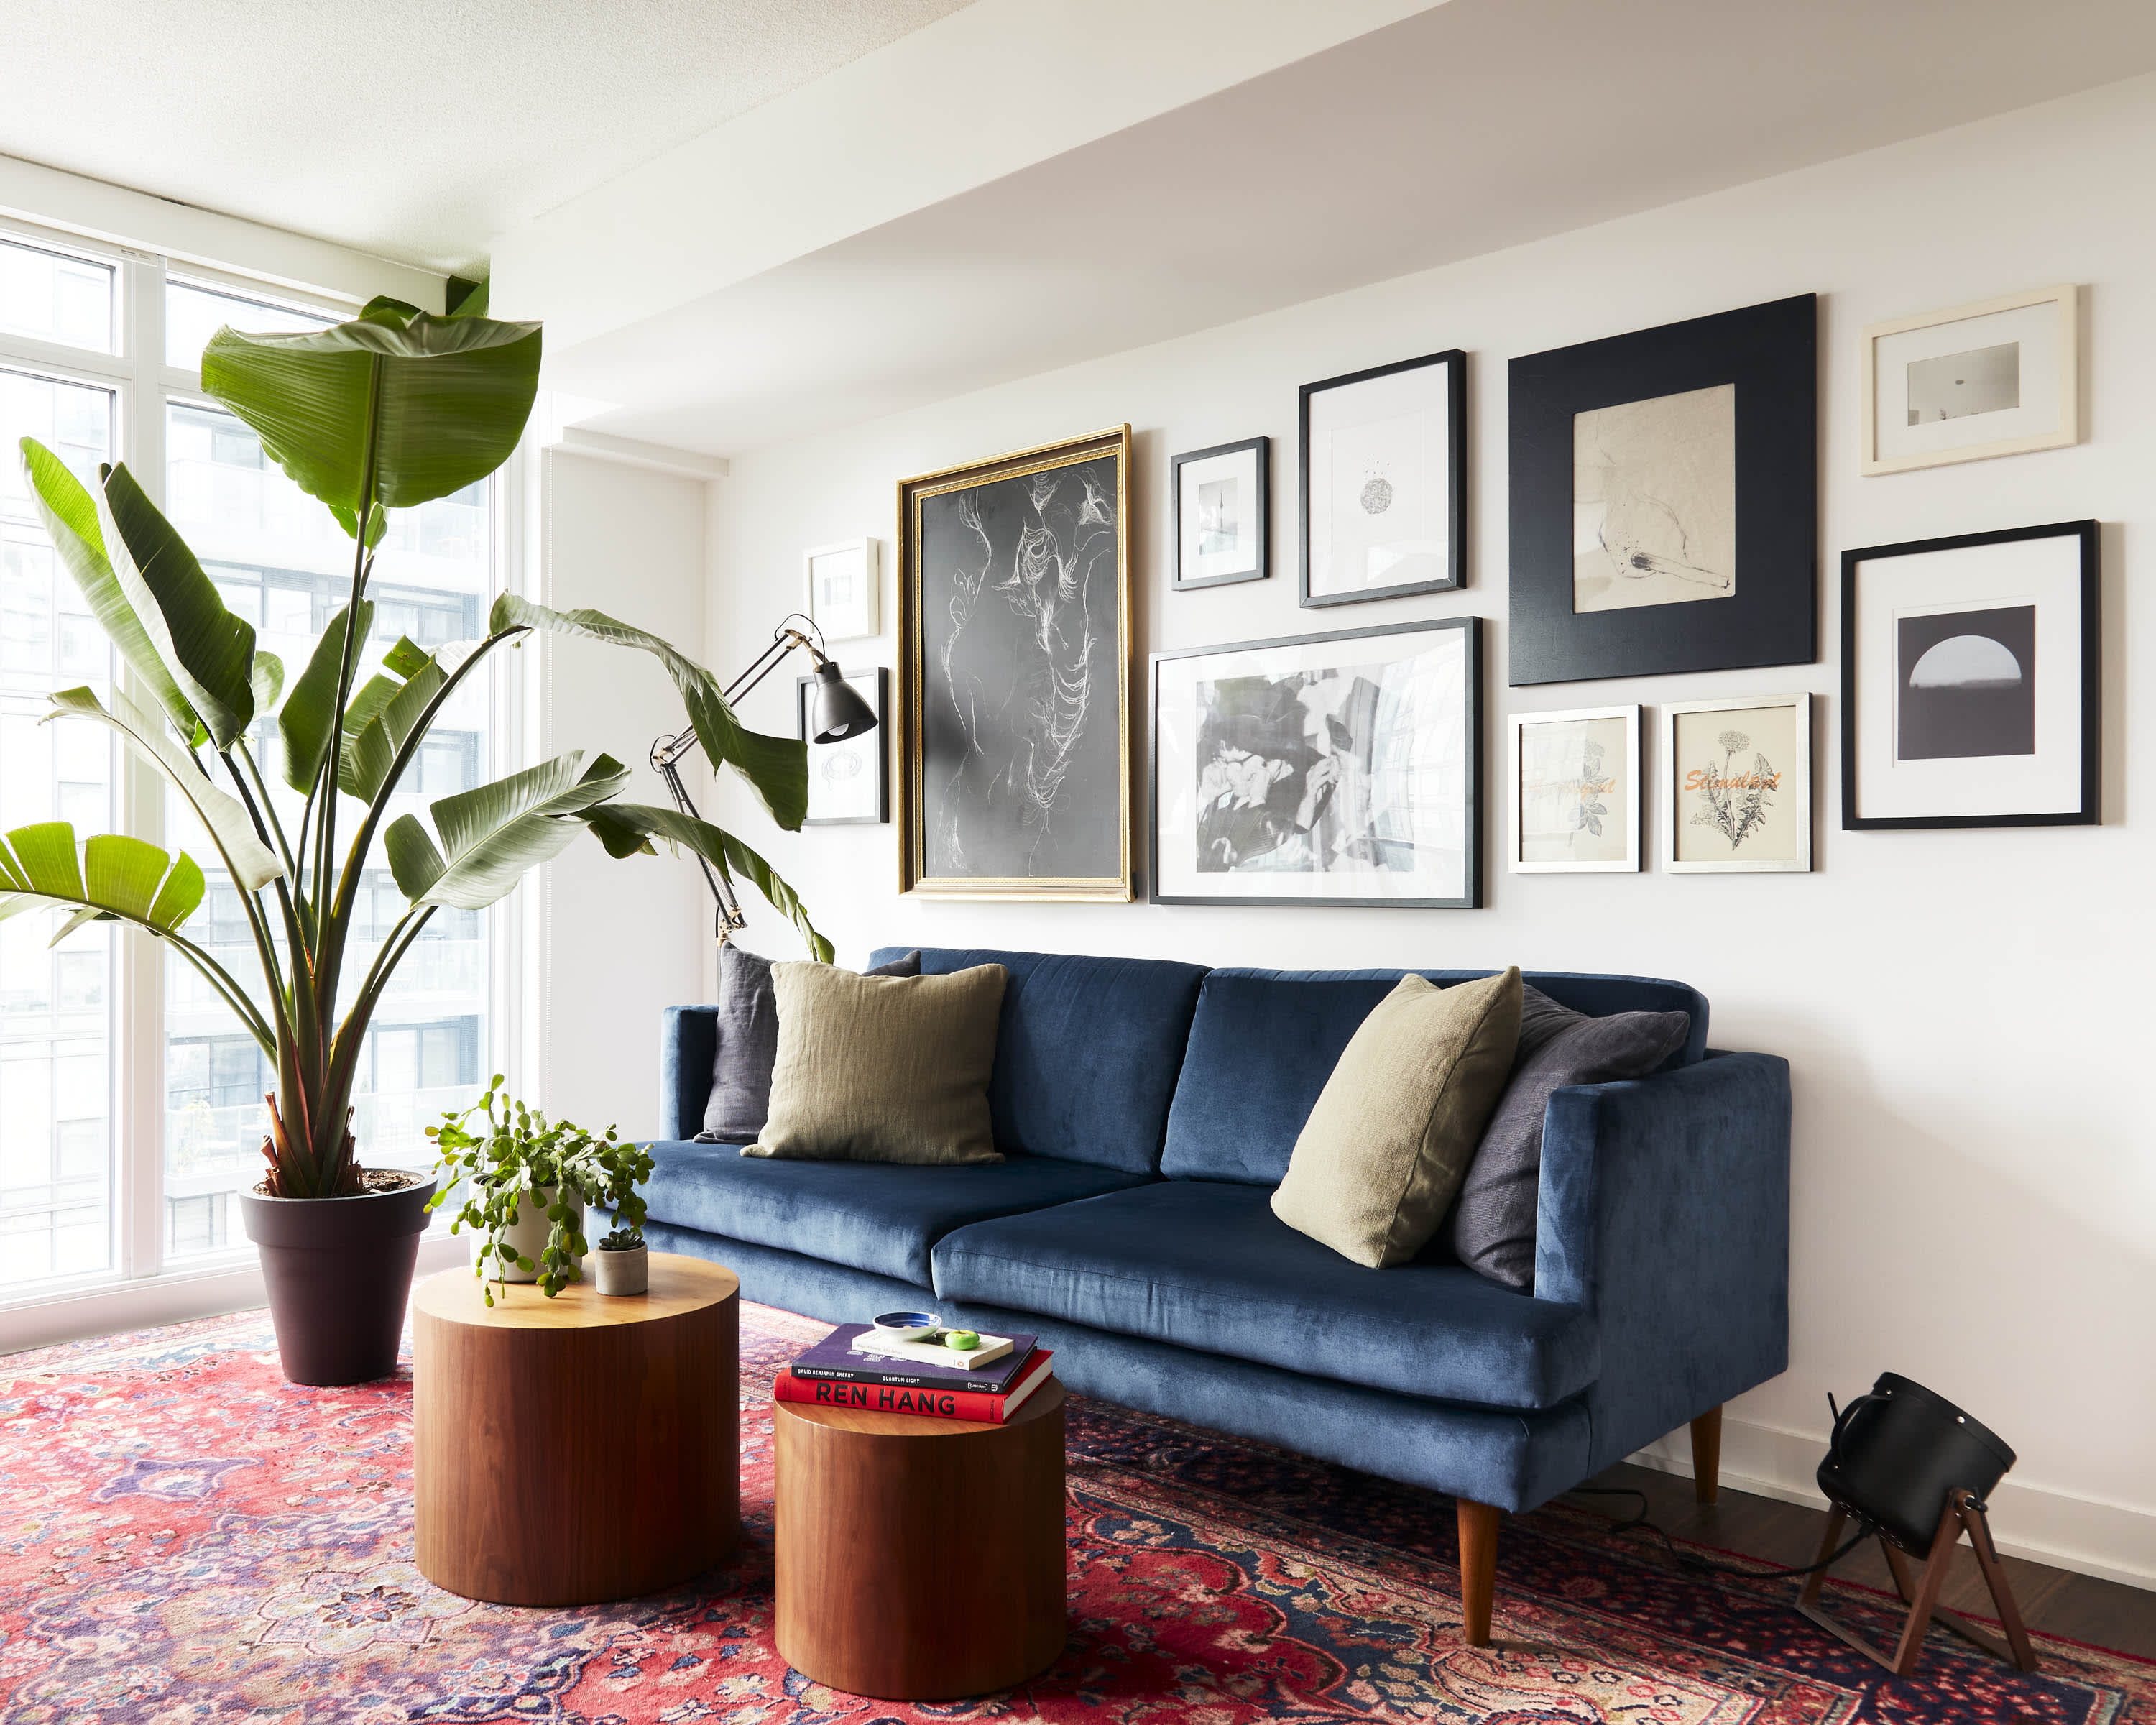 Top 10 Best Interior Design Blogs to Inspire You